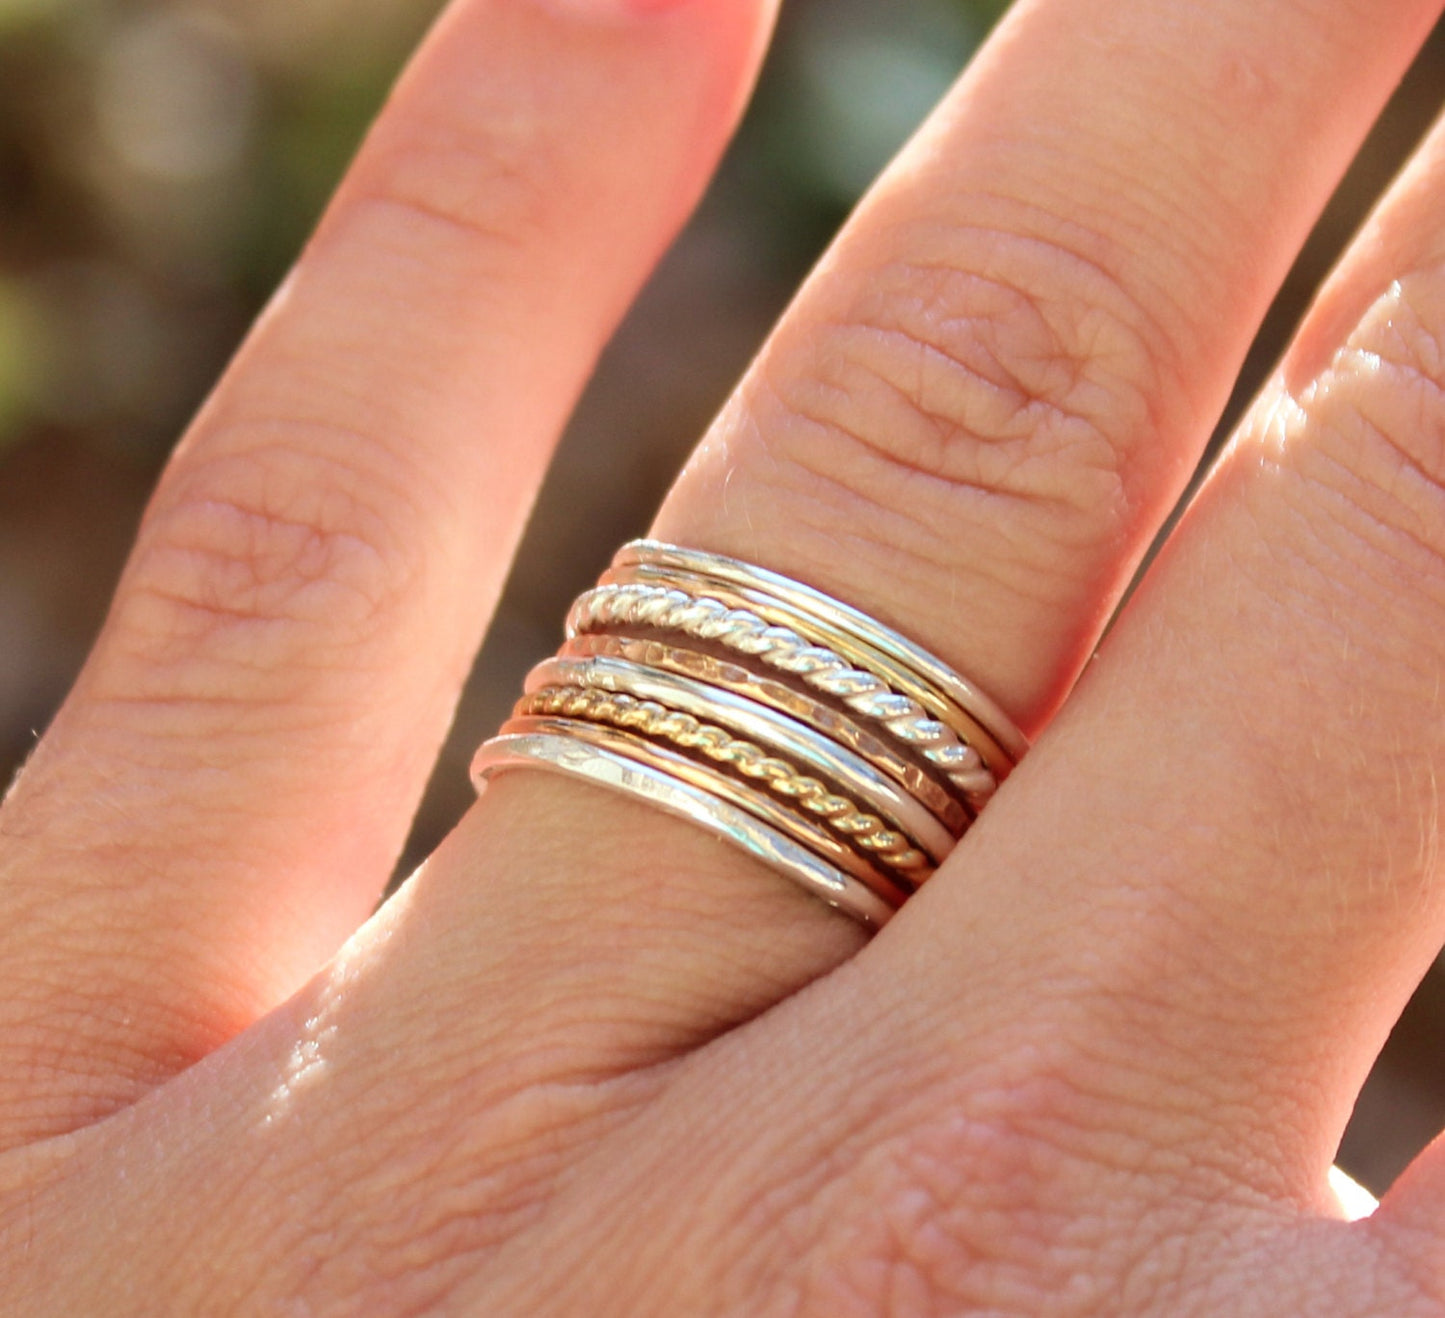 Set of 8 Tri Color Stacking Rings - Sterling Silver, 14K Rose Gold Filled, and 14K Gold Filled - Mixed Metals